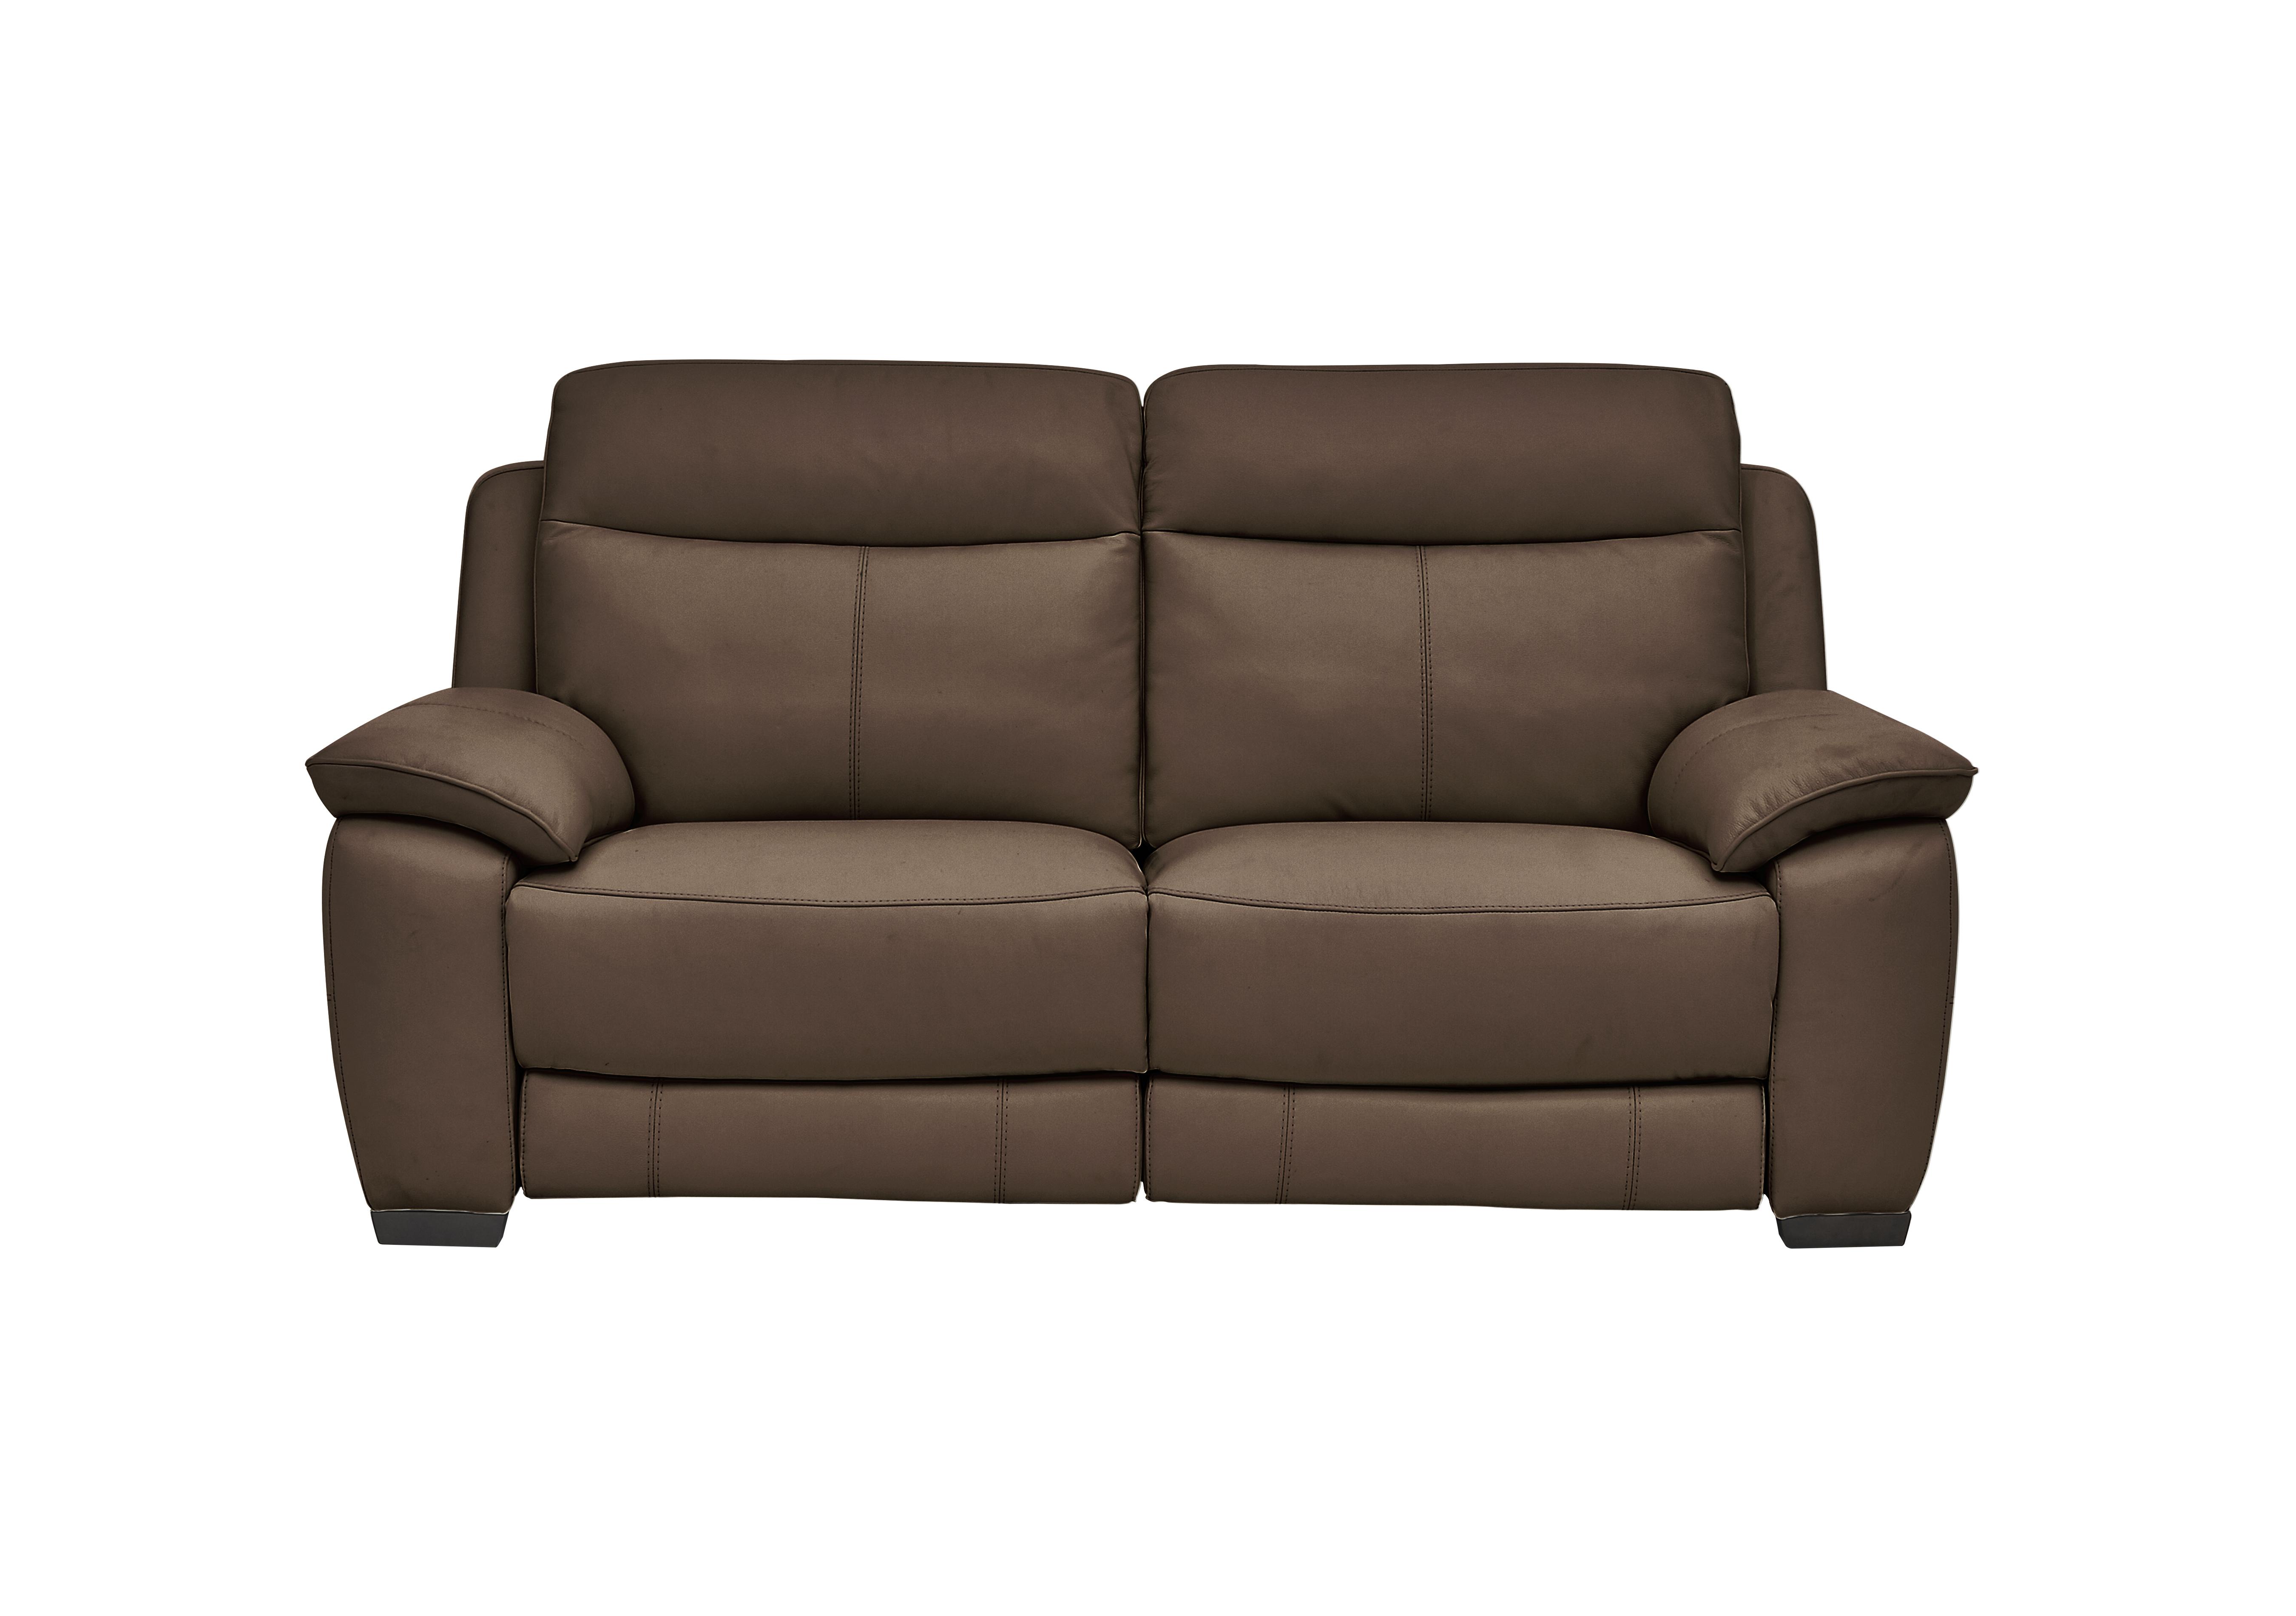 Starlight Express 2 Seater Leather Recliner Sofa with Power Headrests in Bv-1748 Dark  Chocolate on Furniture Village